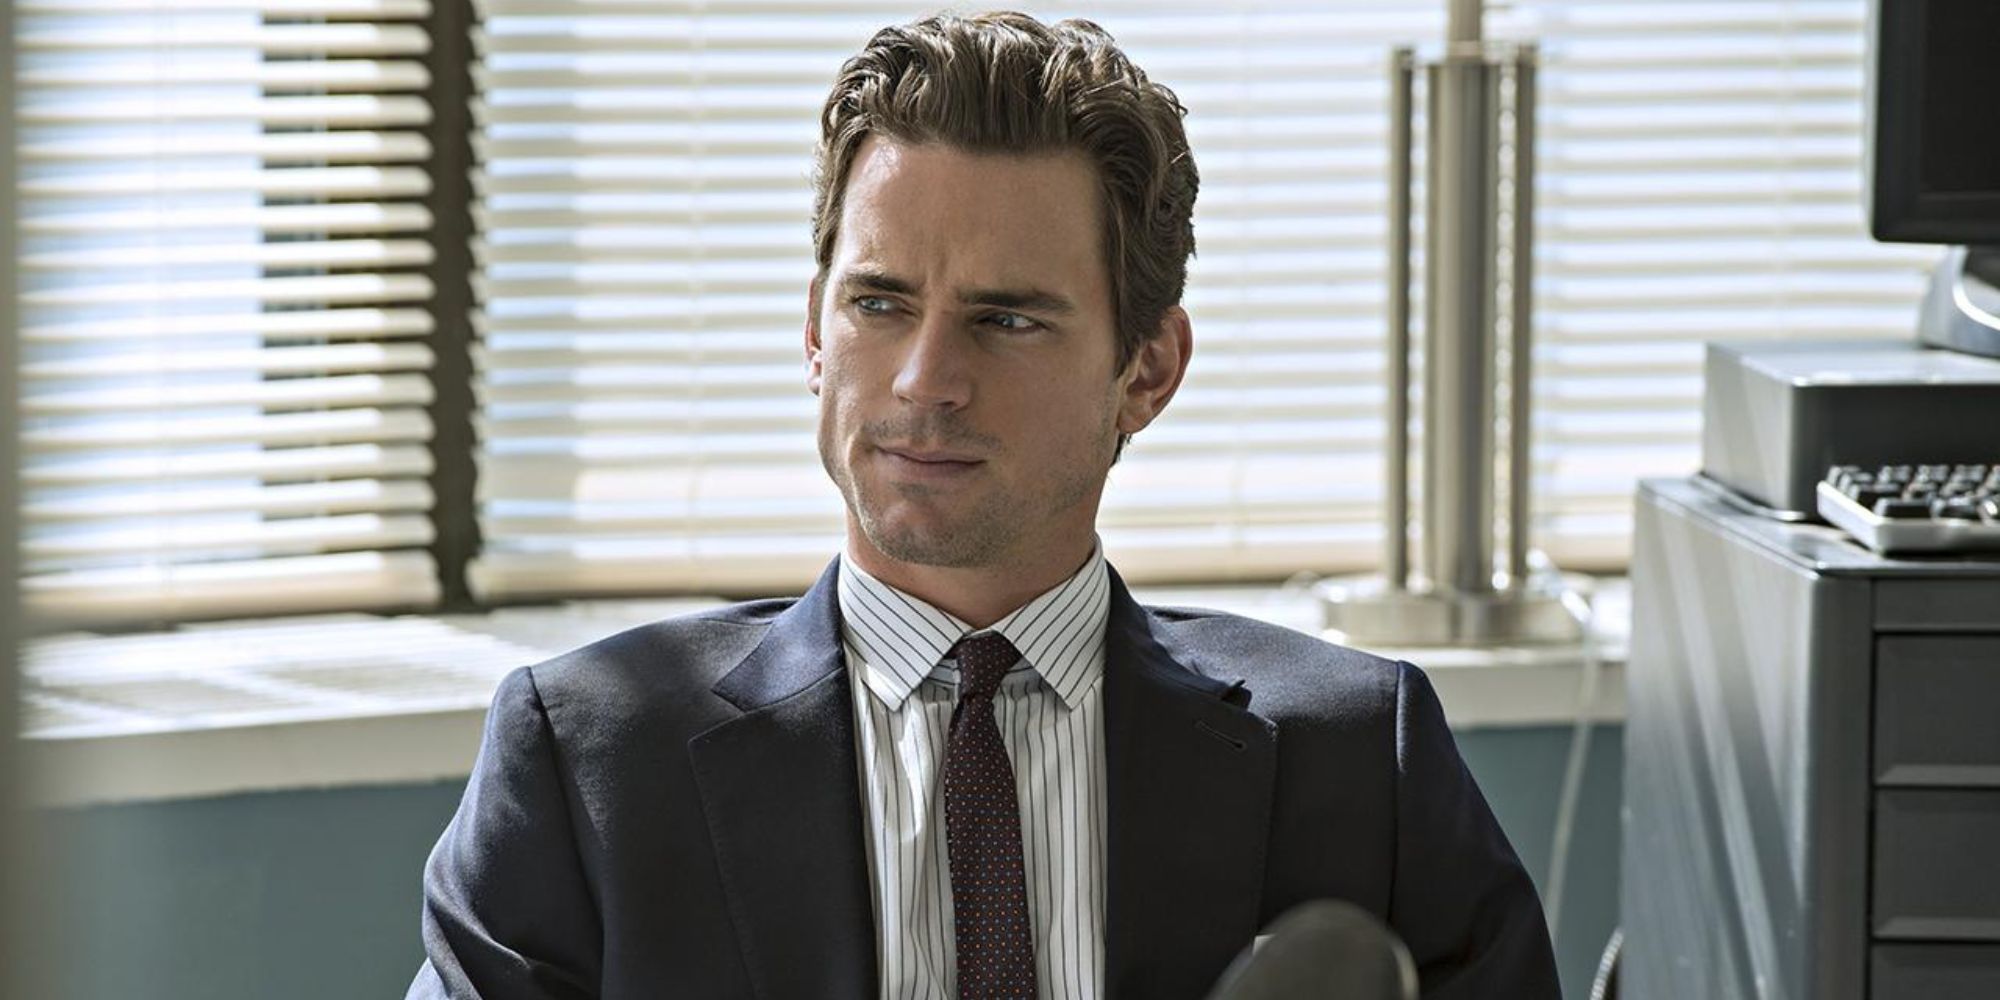 'White Collar' Does This Better Than the Other Crime Procedural TV Shows